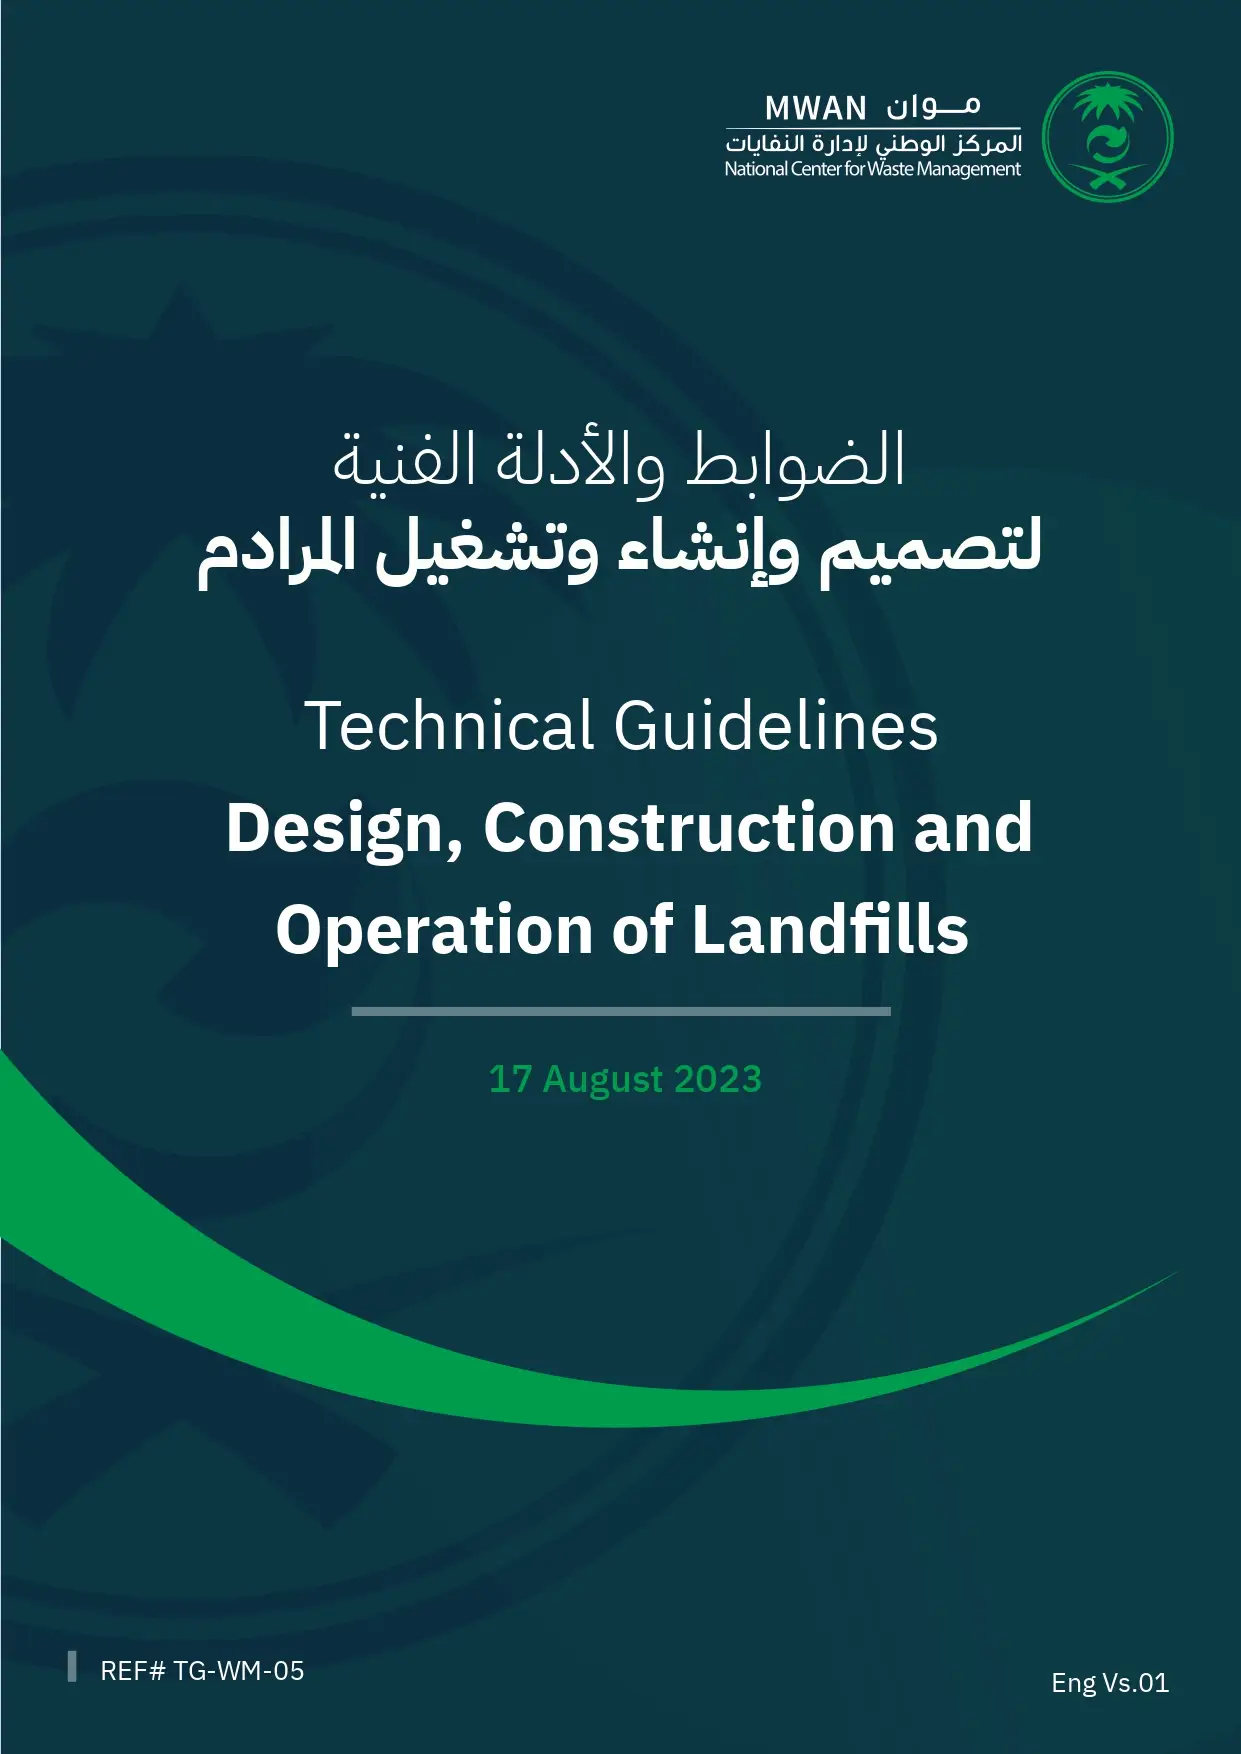 Technical Guidelines- Design, Construction And Operation Of Landfills